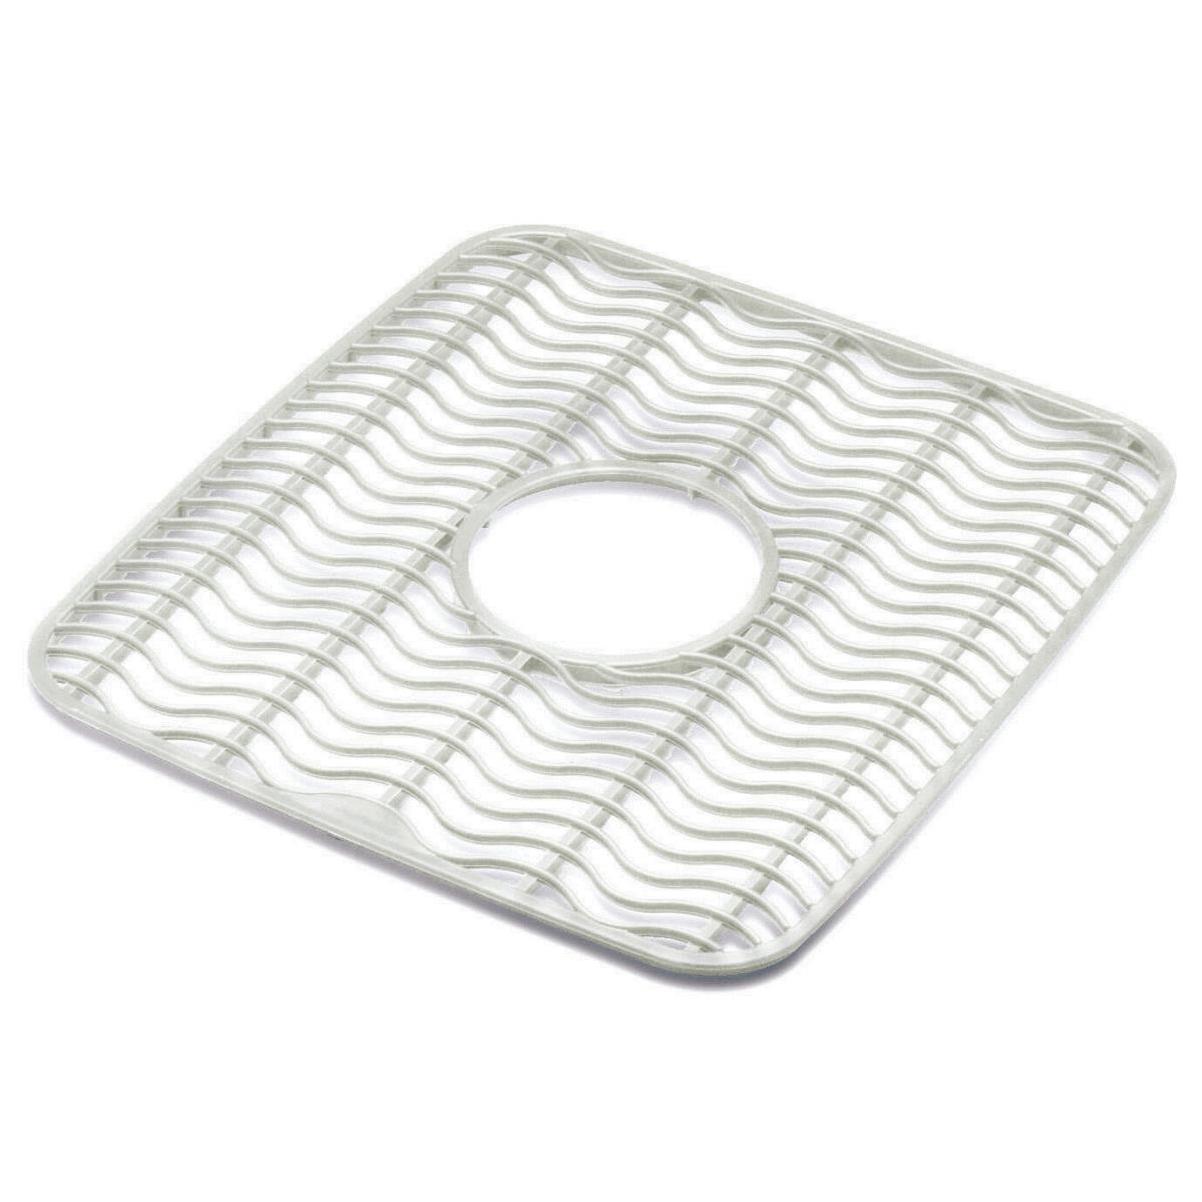 Should You Buy? Rubbermaid Sink Protector Mat 